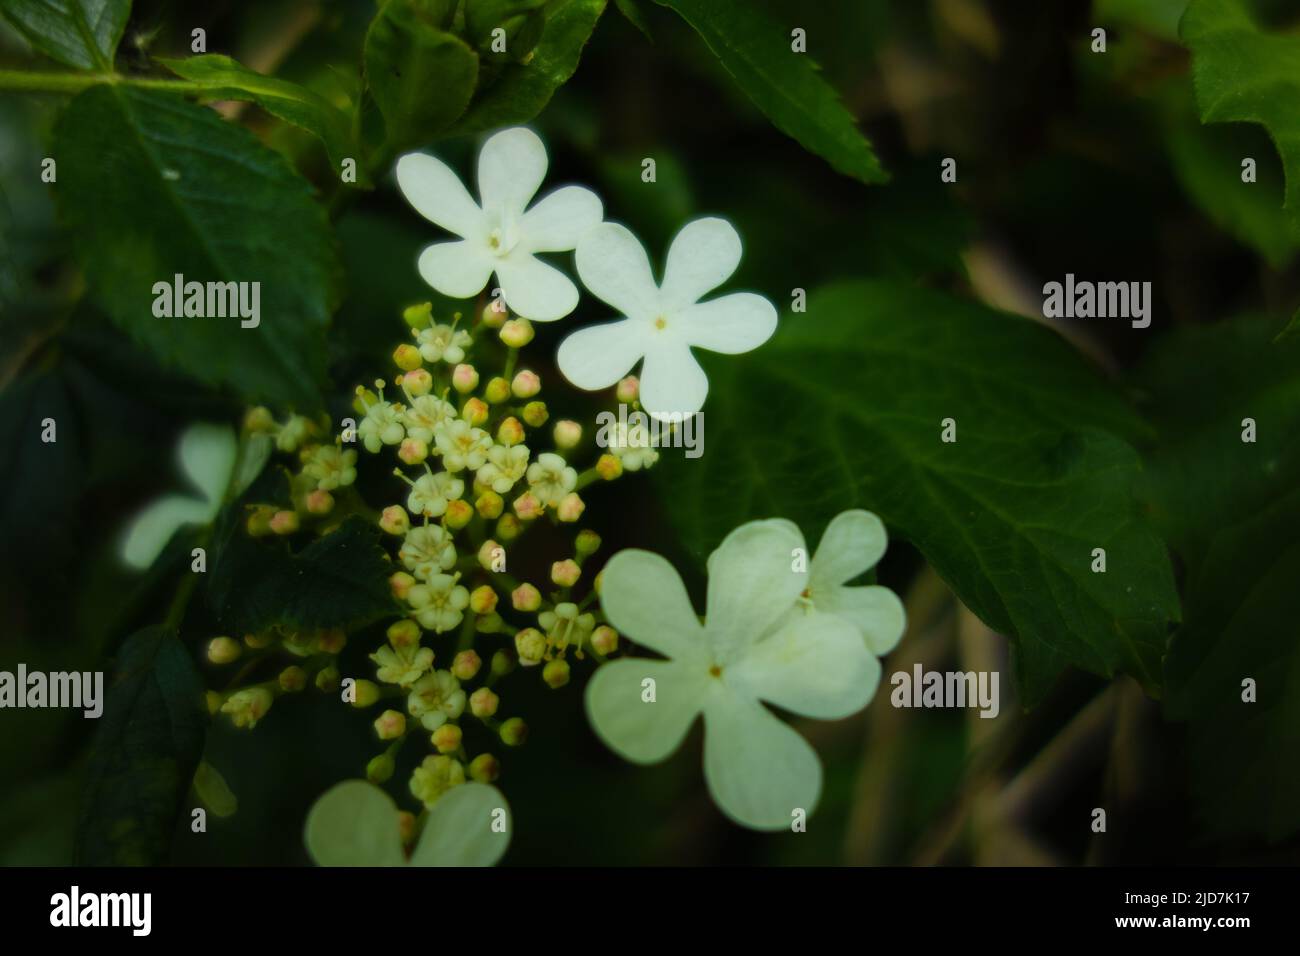 numerous star like white flowers and buds in a circle with a natural green background Stock Photo